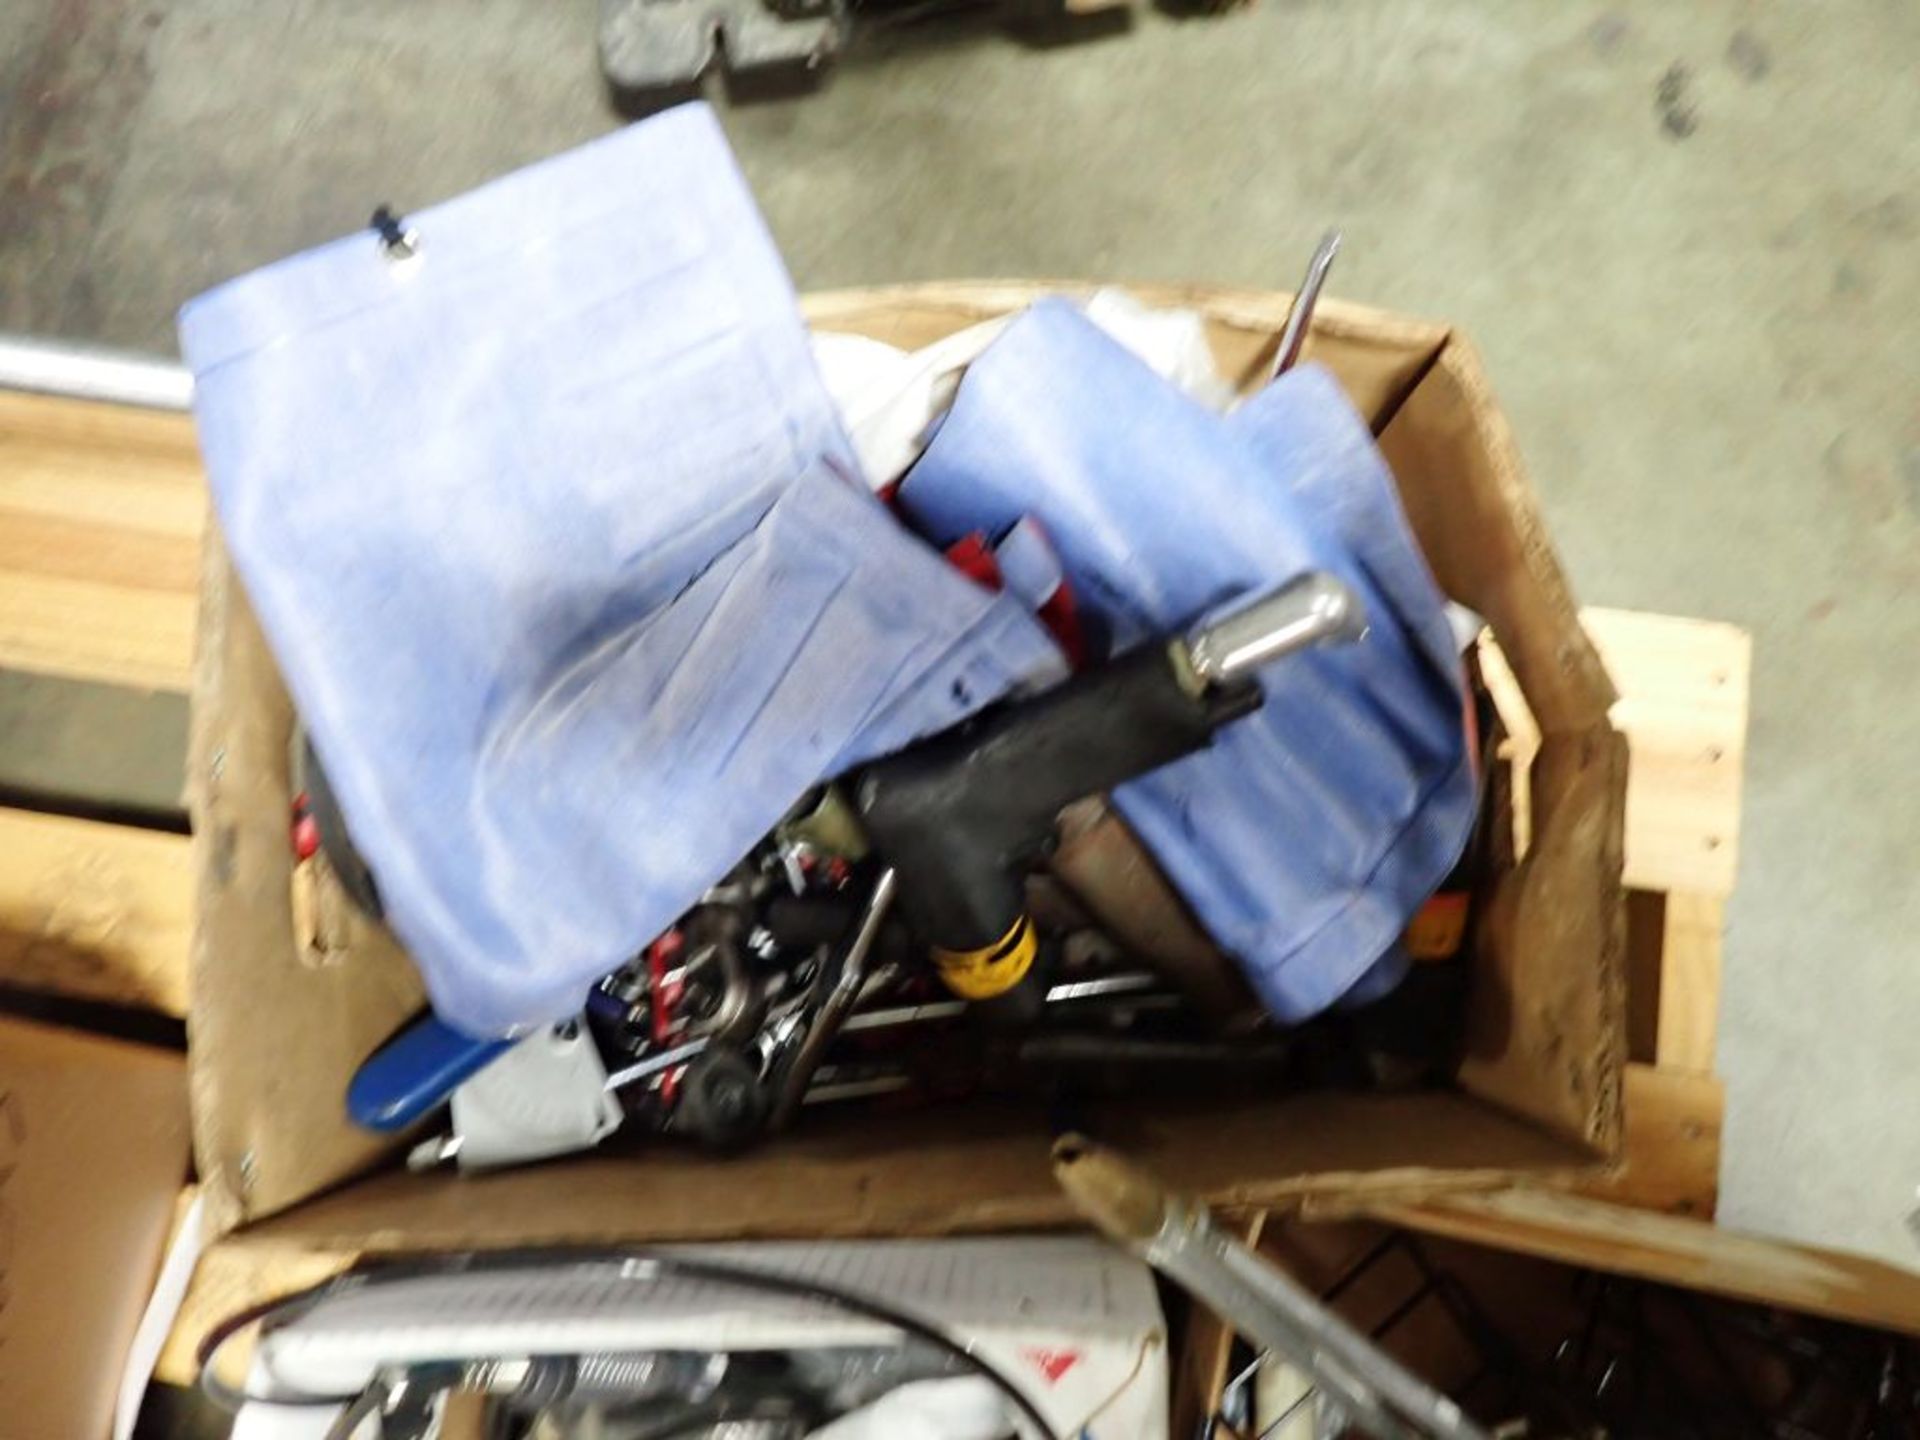 Lot of Assorted Tools | Tag: 241476 | Limited Forklift Assistance Available - $10.00 Lot Loading - Image 7 of 8